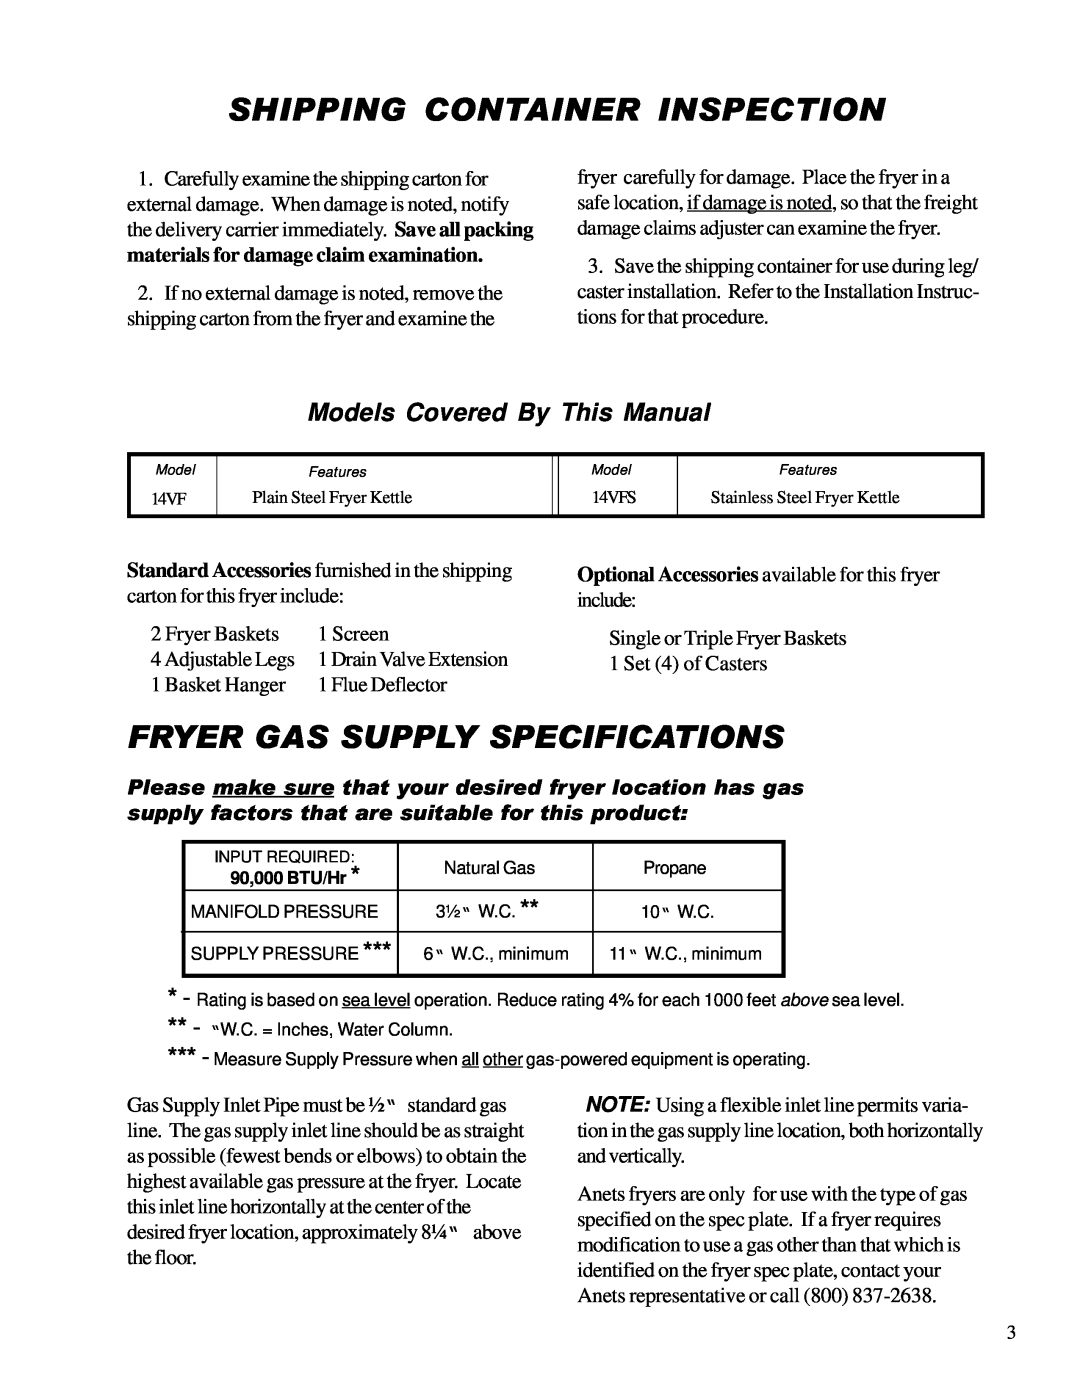 Anetsberger Brothers 14VFS Shipping Container Inspection, Fryer Gas Supply Specifications, Models Covered By This Manual 